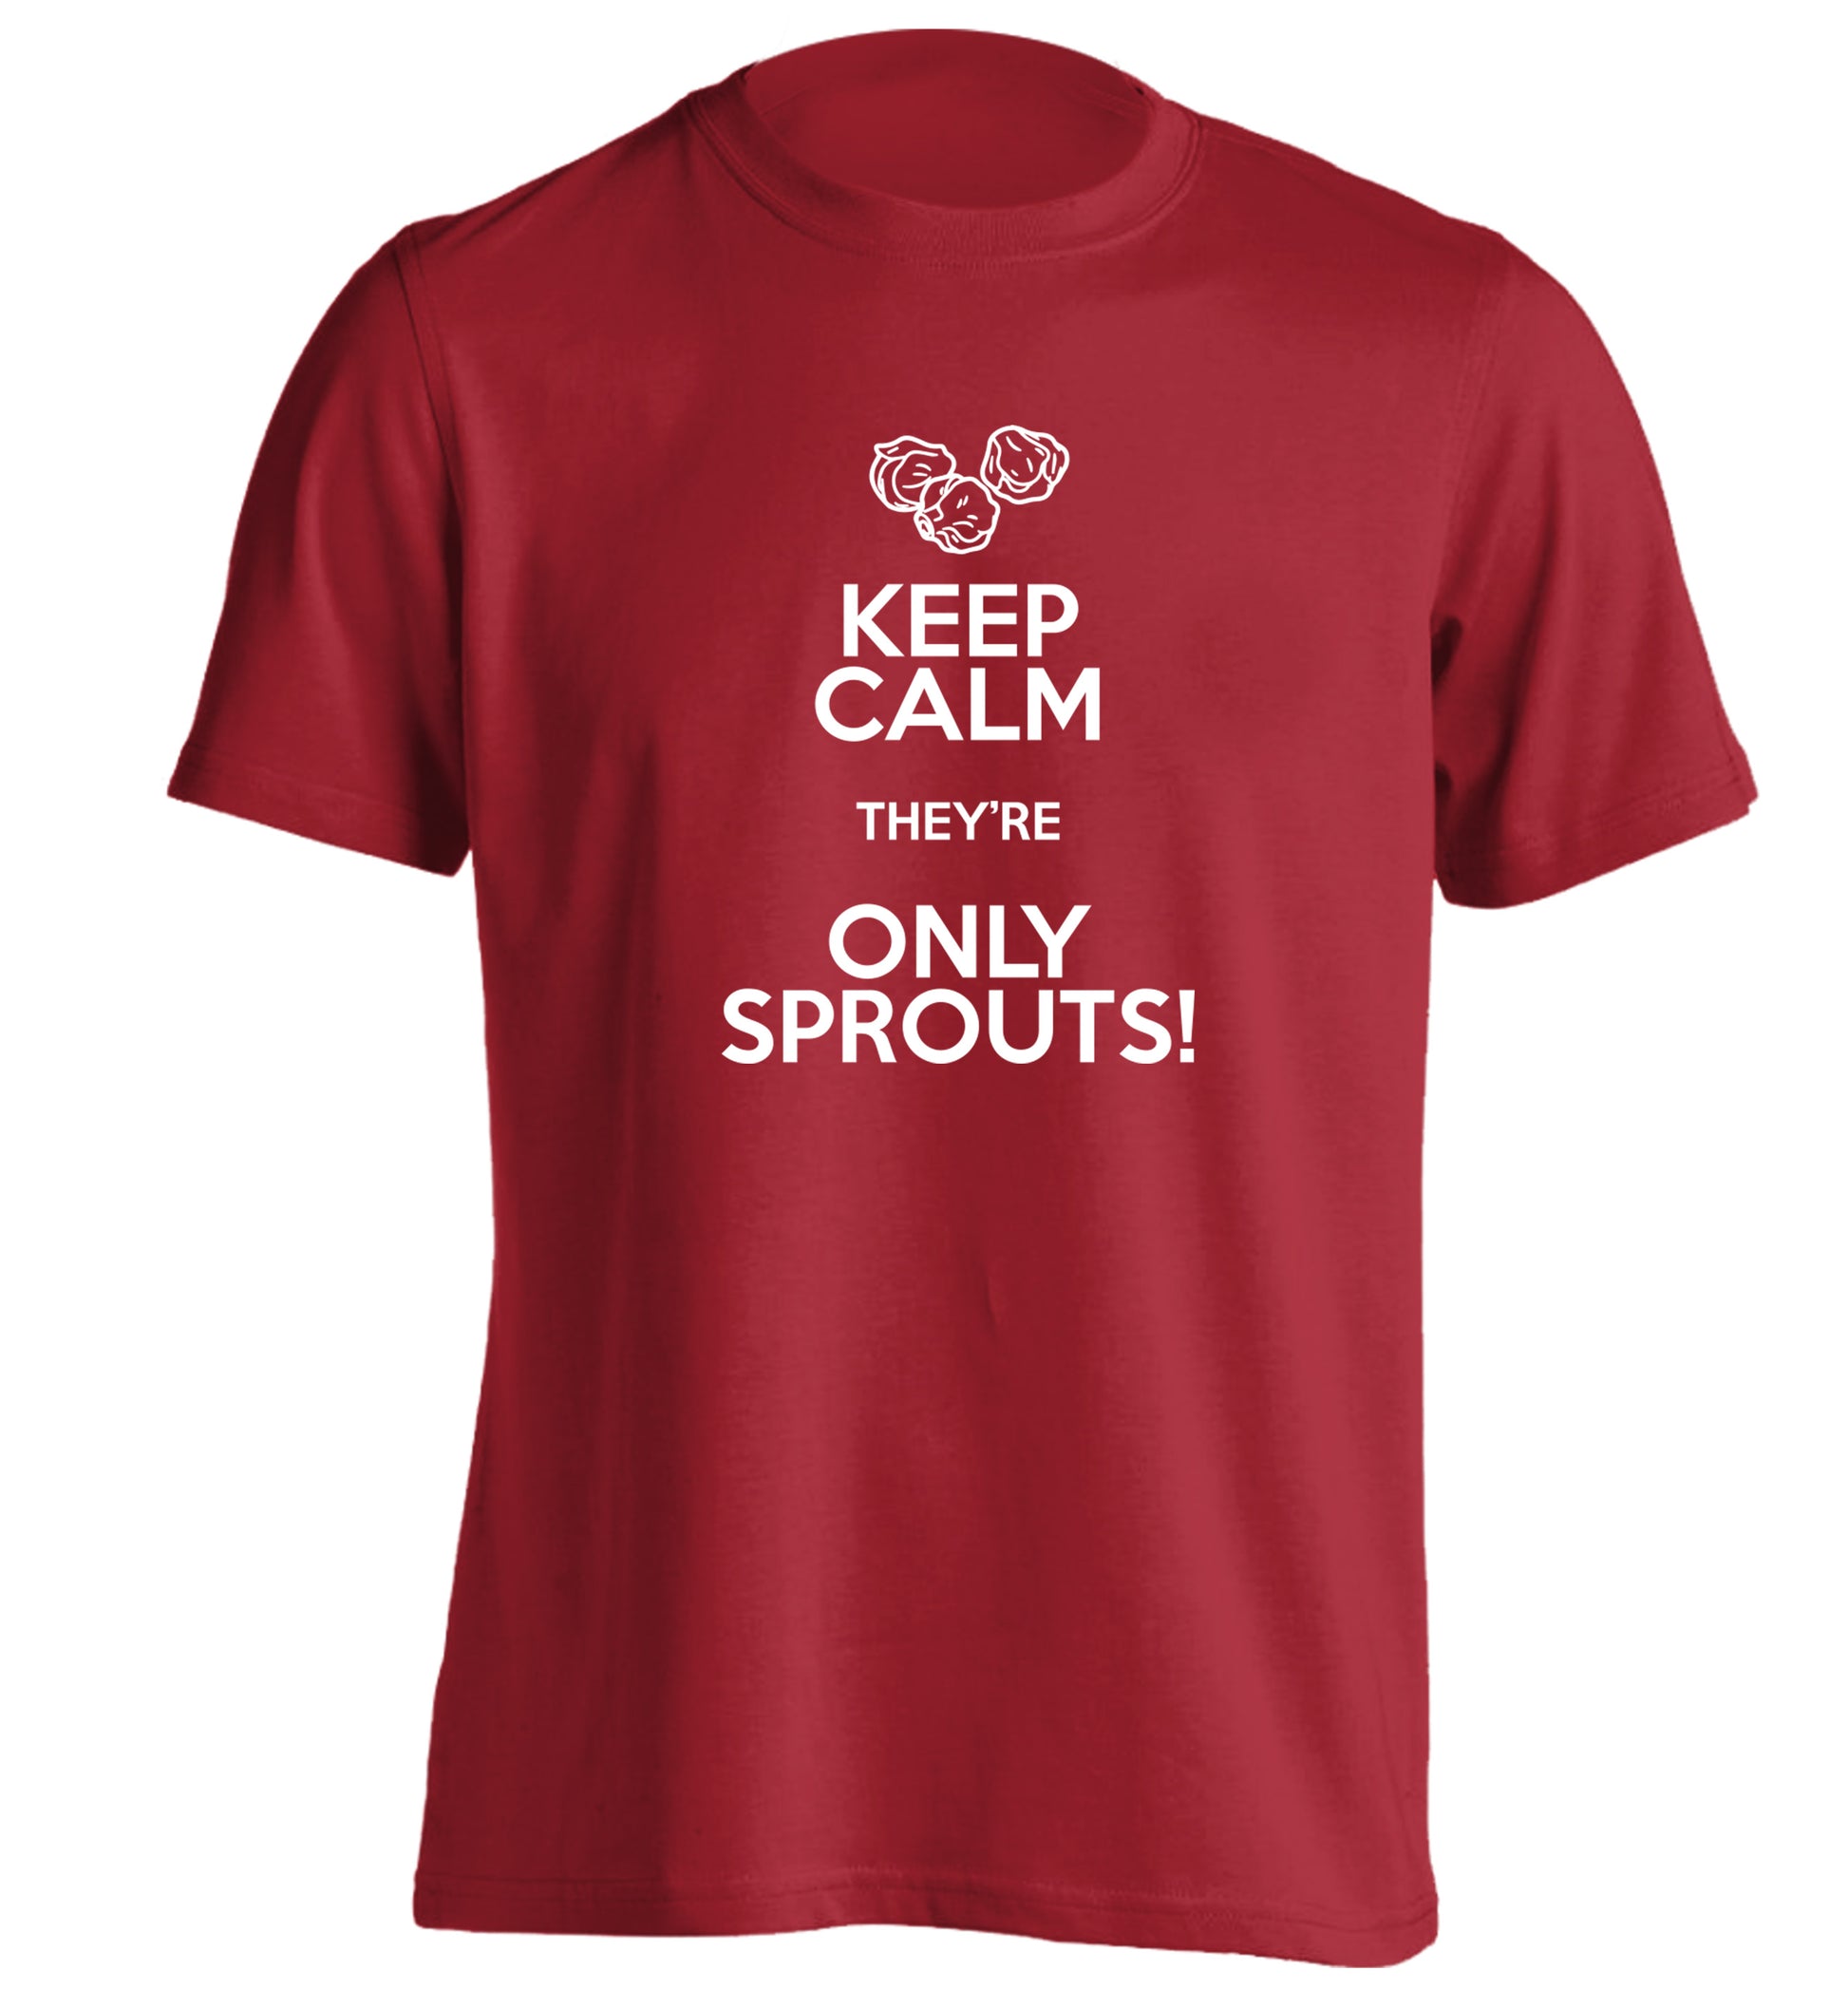 Keep calm they're only sprouts adults unisex red Tshirt 2XL